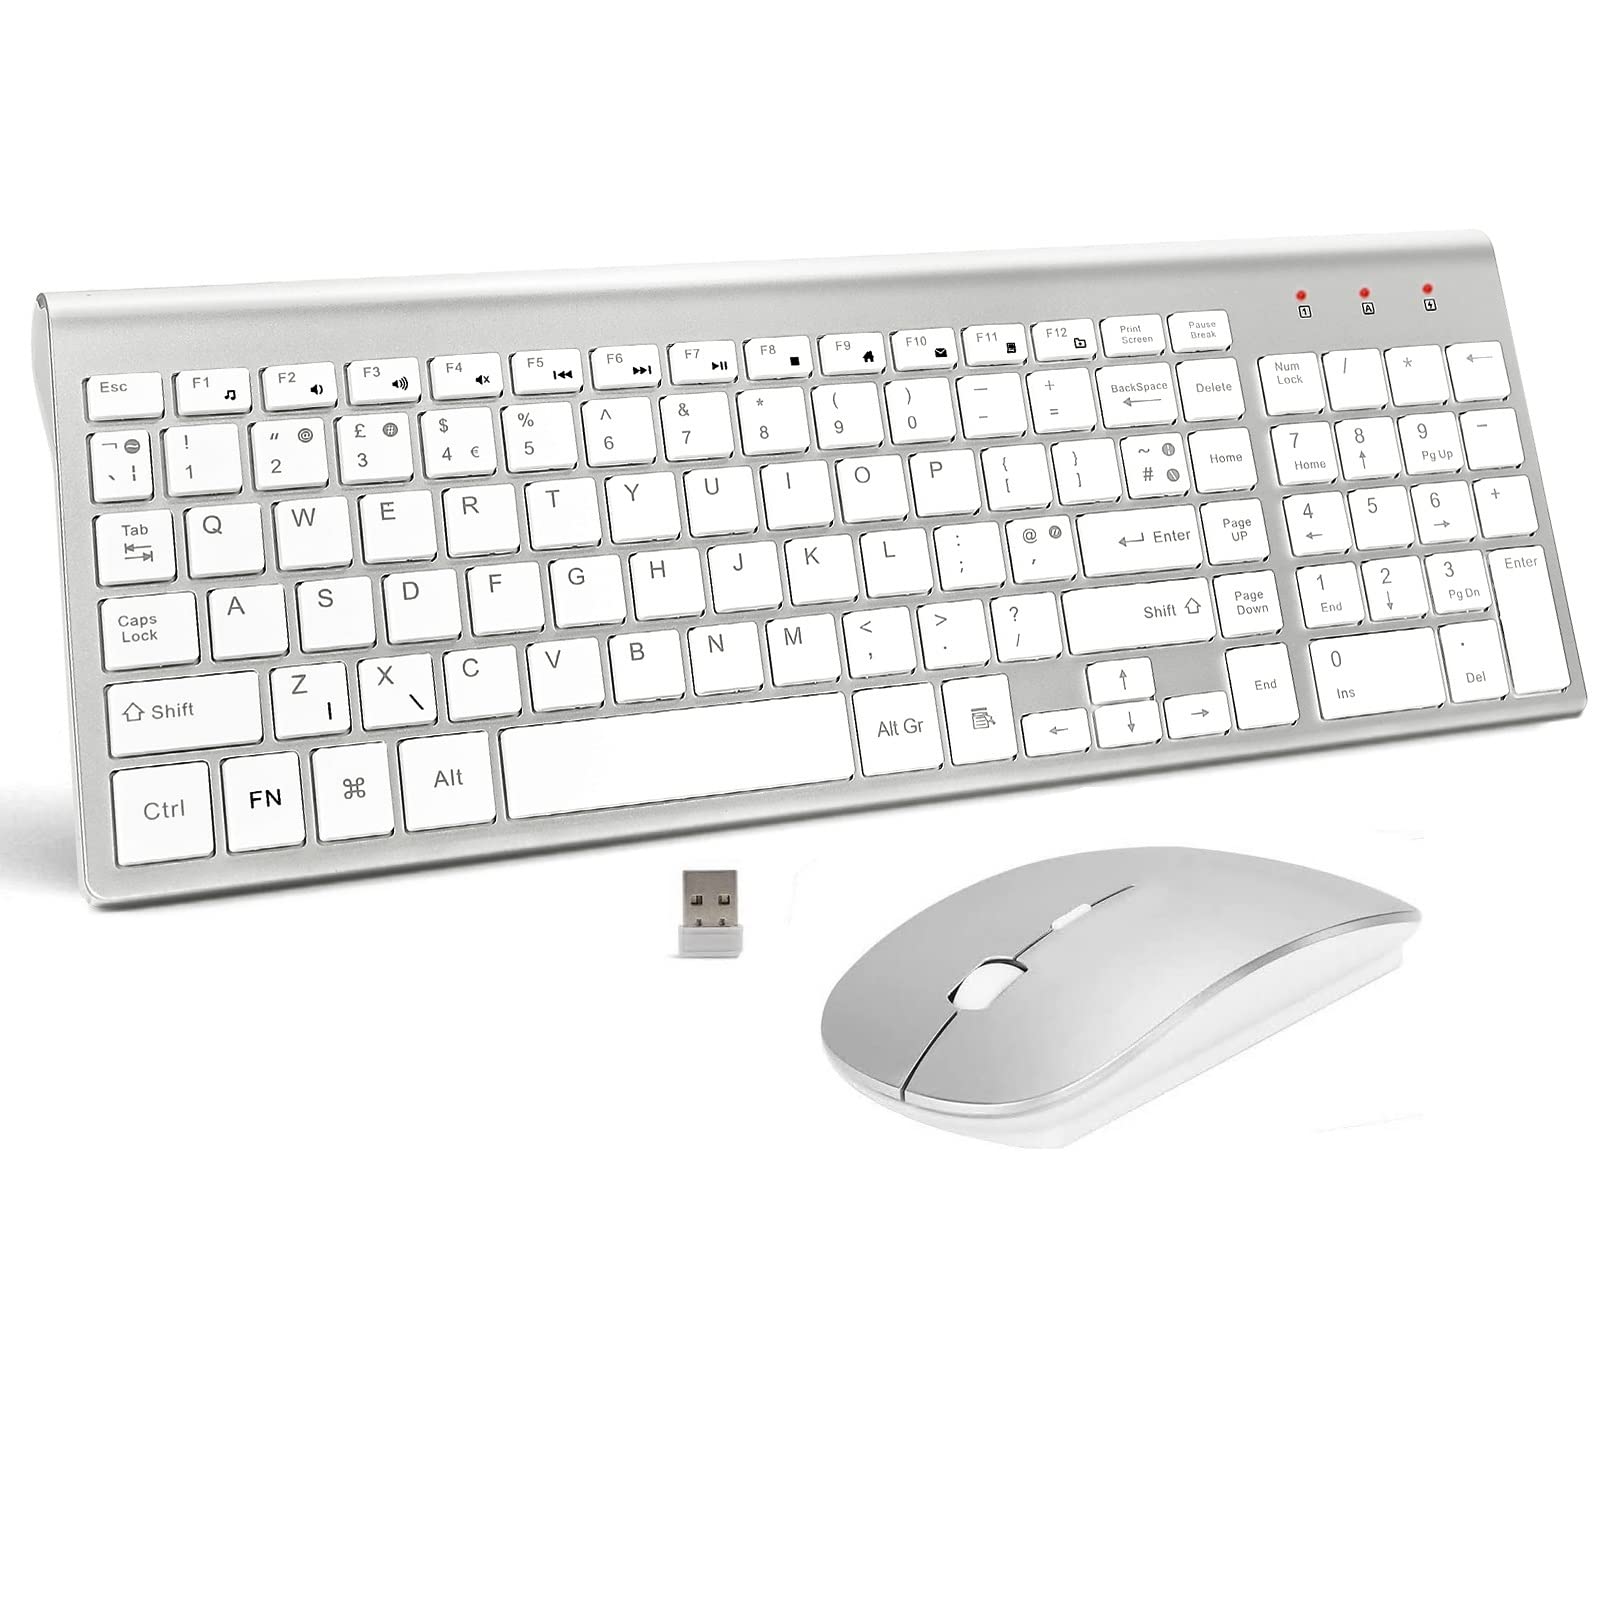 FENIFOX Wireless Keyboard and Mouse Sets,UK Layout 2.4Ghz USB Receiver Full Size Keyboard Combo Compact Compatible with iMac Mac PC Laptop Tablet Computer Windows (Silver White)